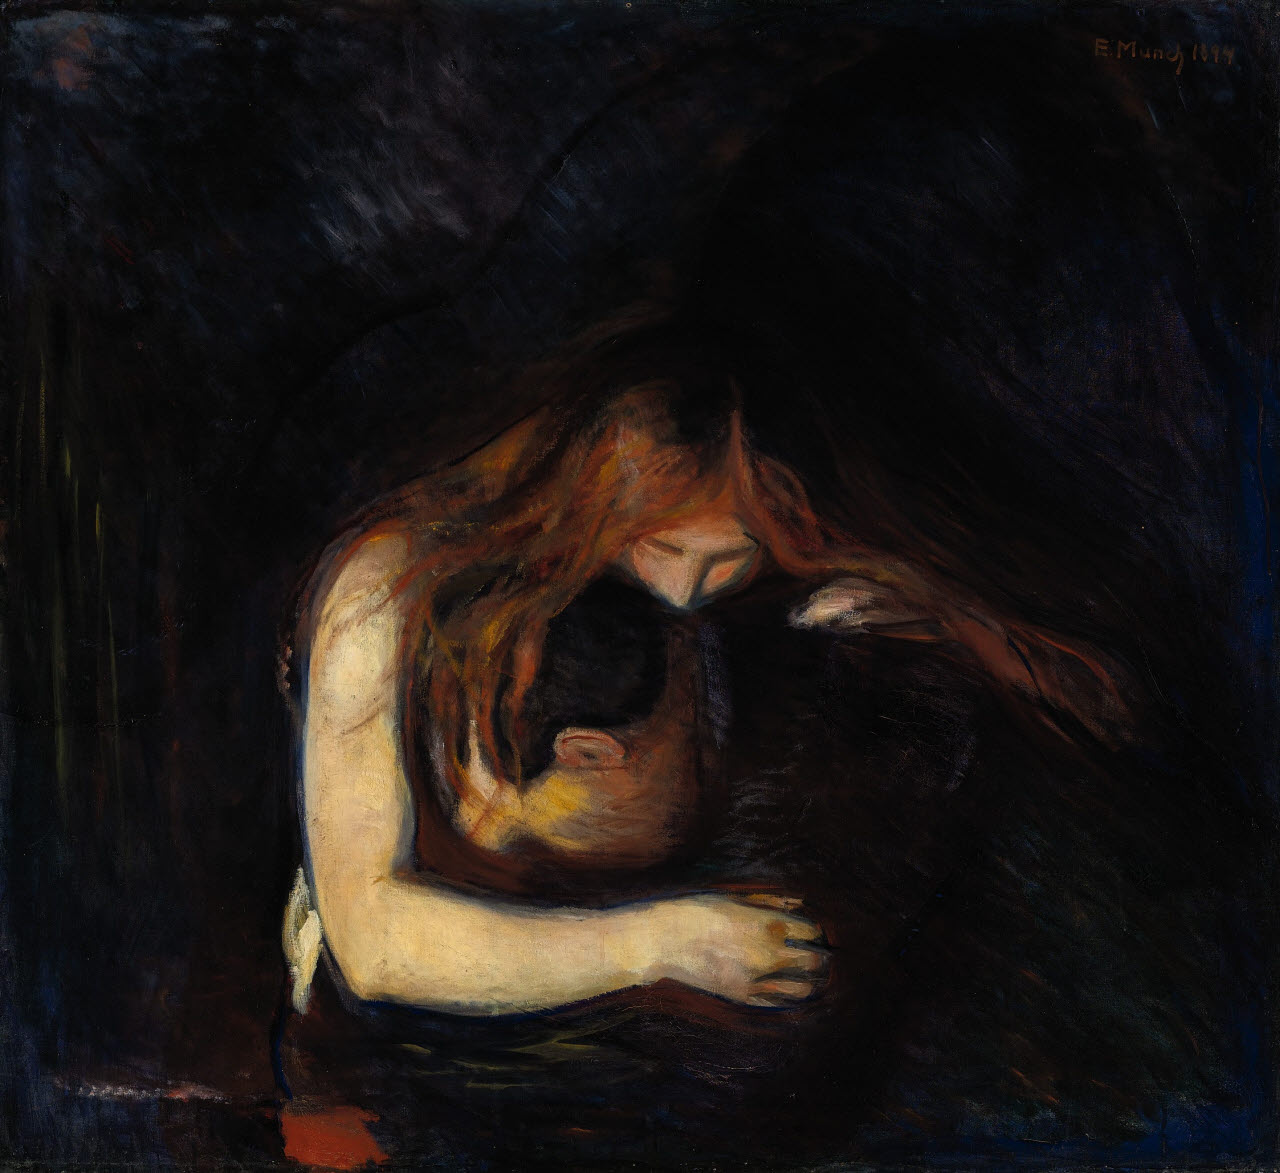 Edvard-Munch-Vampire-1894-private-collection